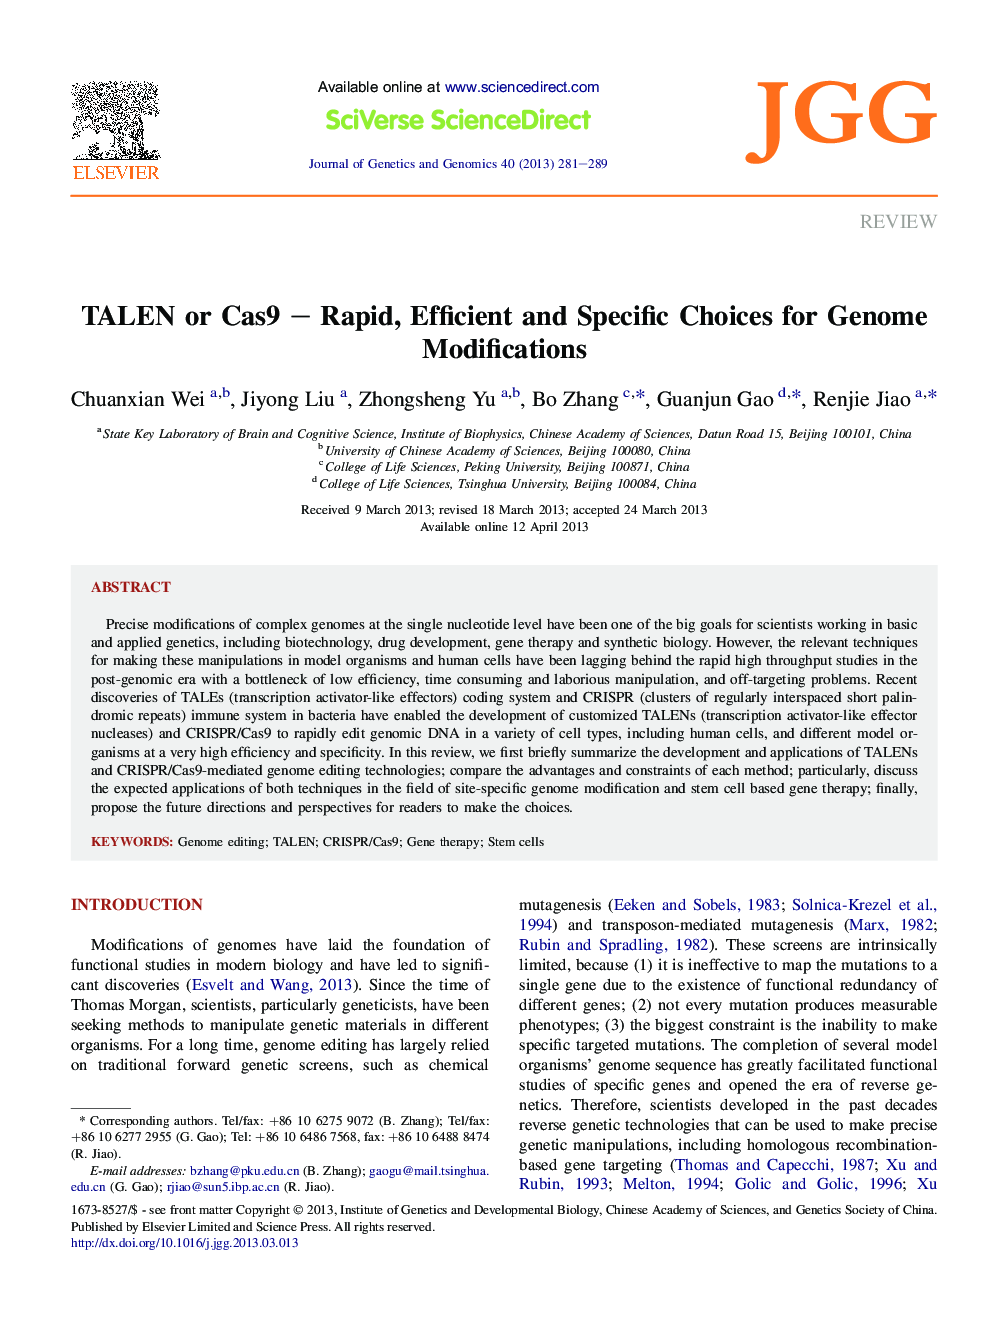 TALEN or Cas9 – Rapid, Efficient and Specific Choices for Genome Modifications